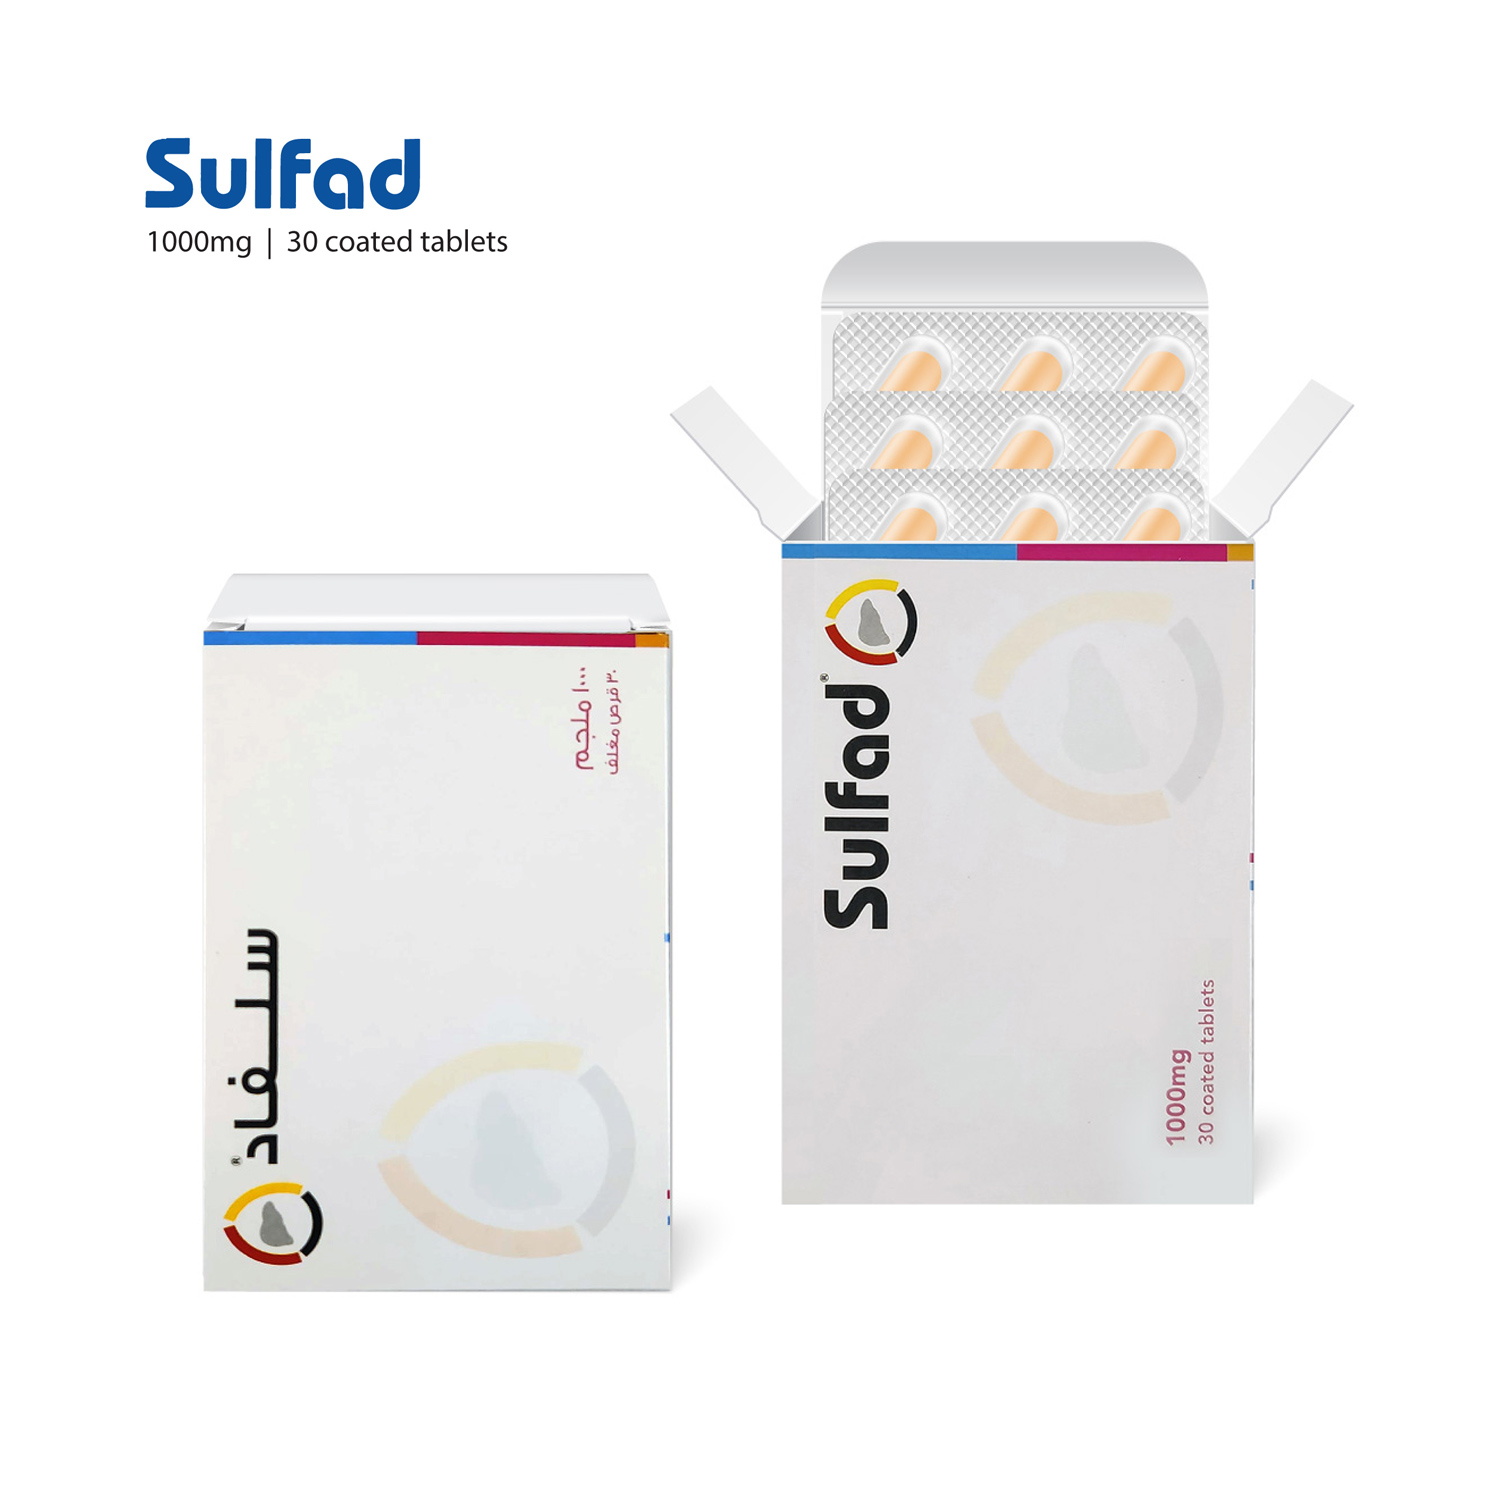 Sulfad -Liver Function Support,30 Tab - Anti Oxidant, Potent Hepatoprotective, Anti-Inflammatory,Empower Metabolic Activity.